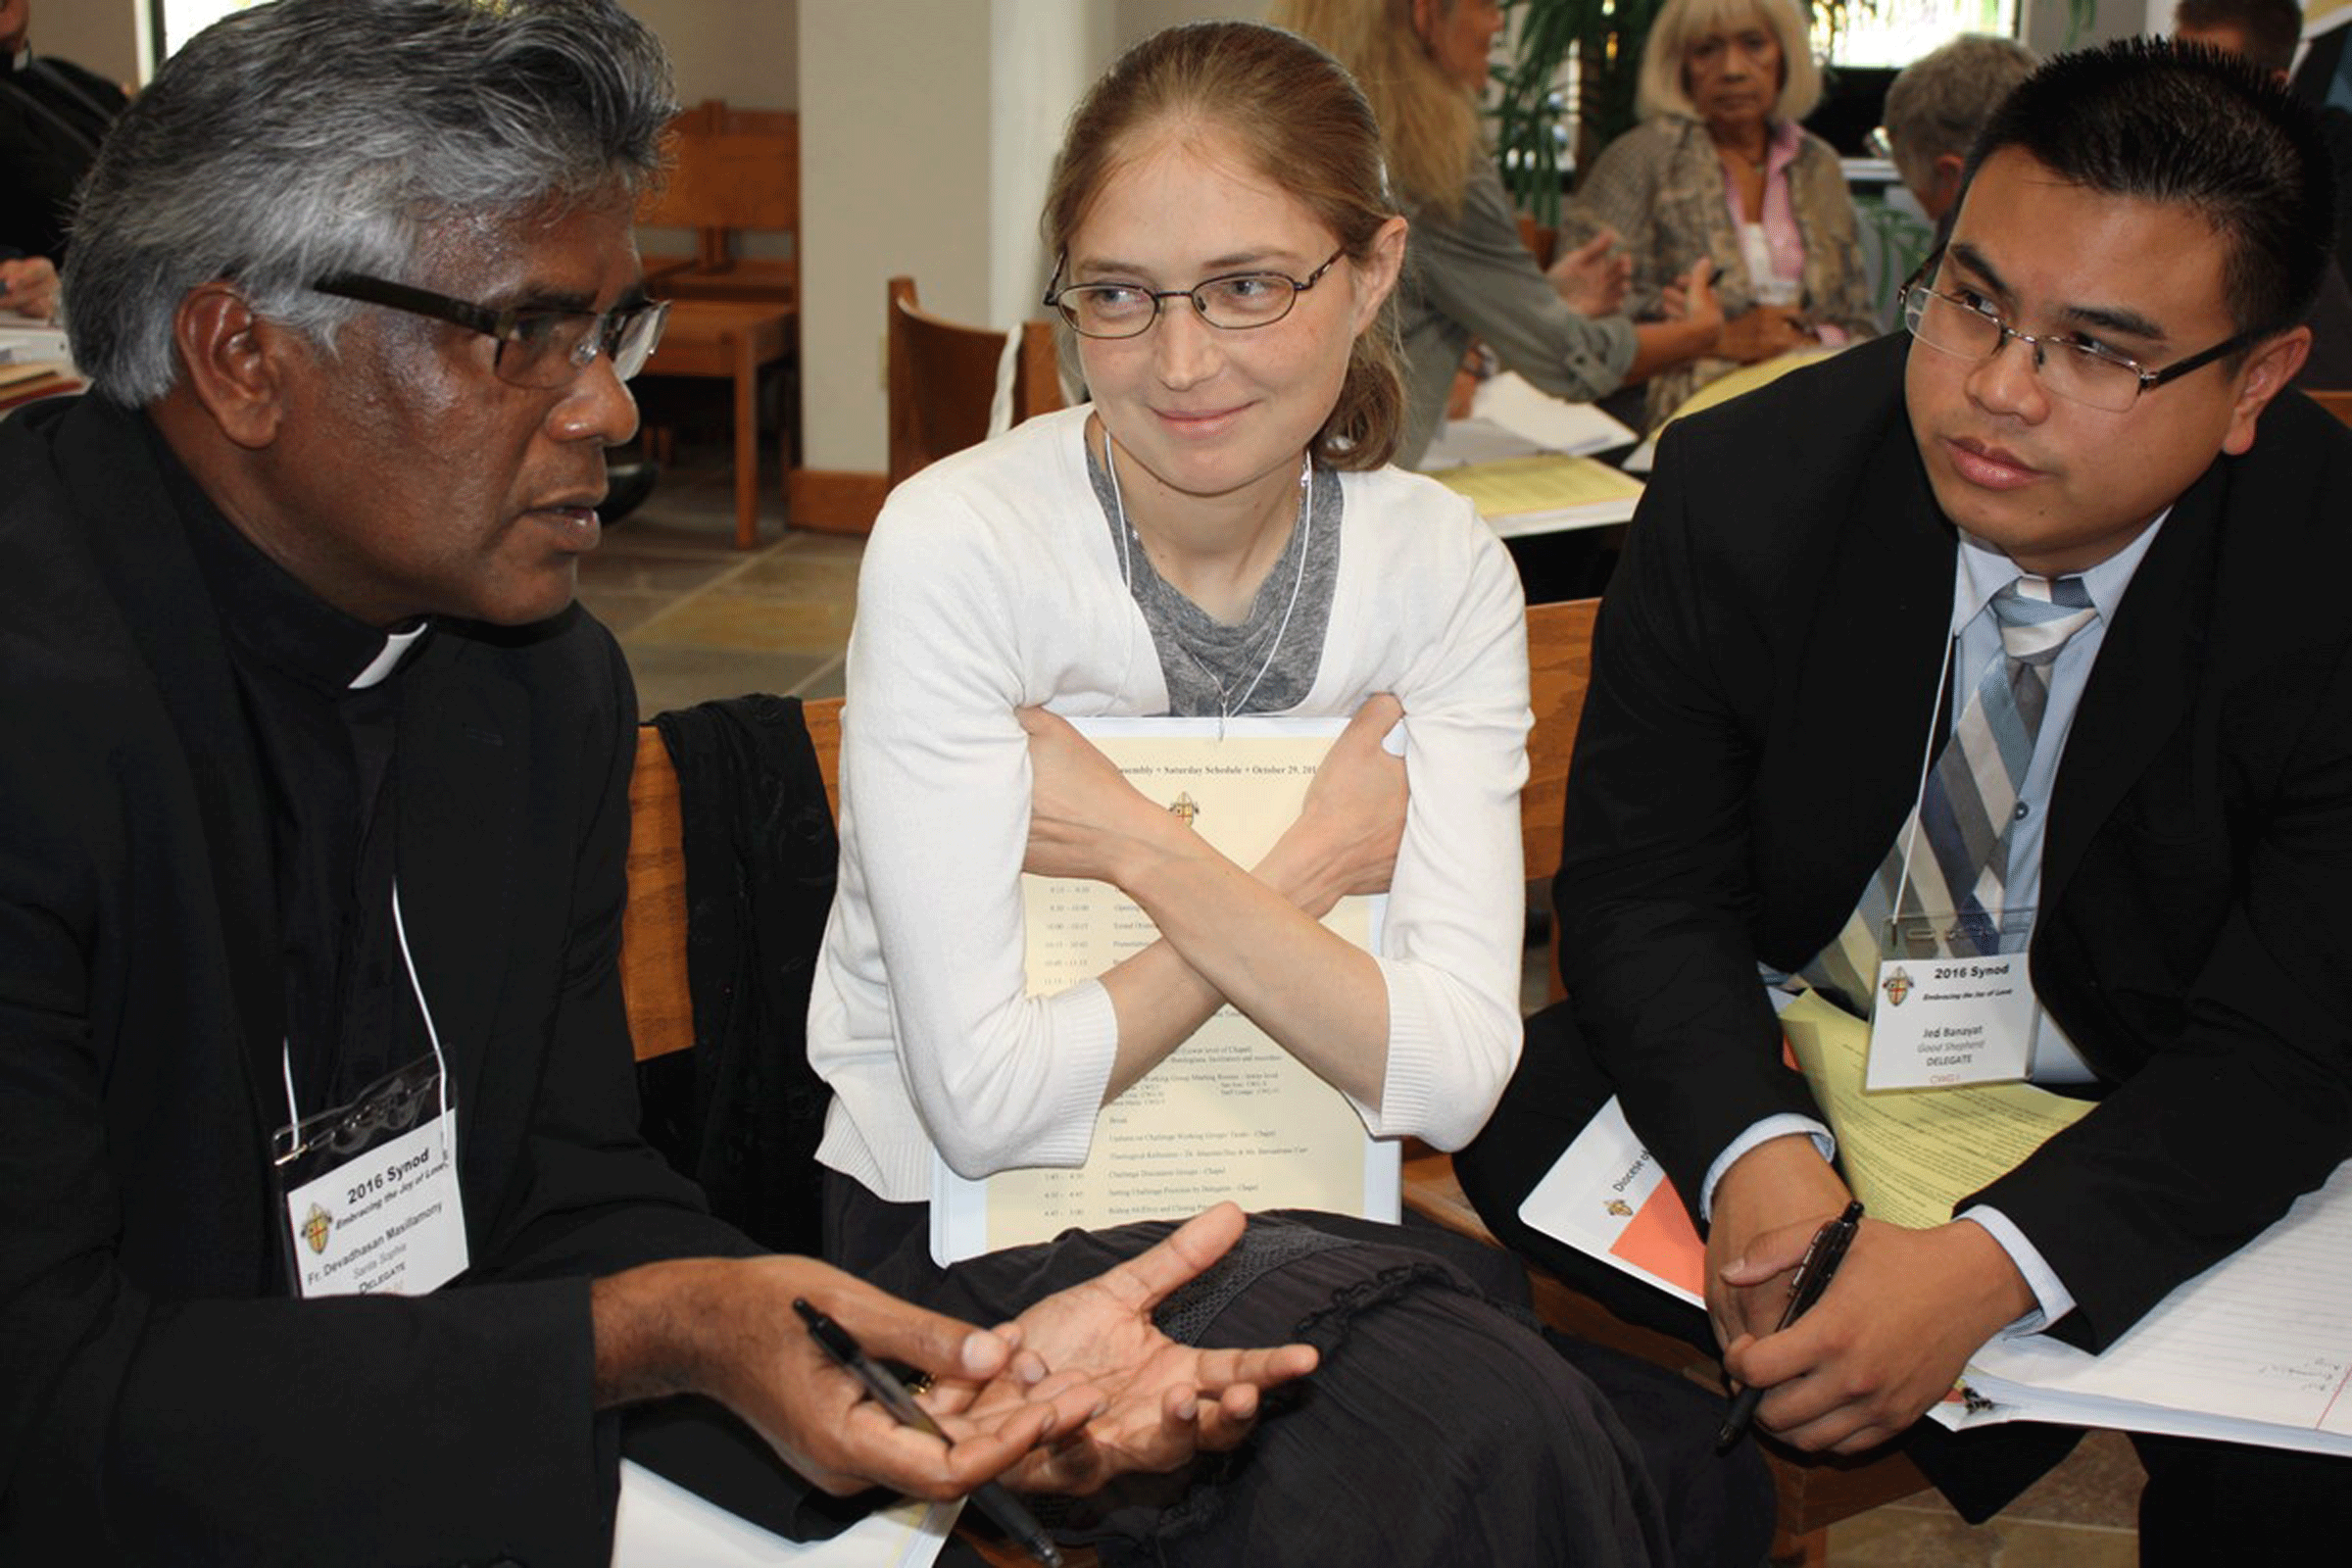 In the working groups, lay leaders, priests and theologians all met together. (Photo: courtesy of Diocese of San Diego/Aida Bustos)